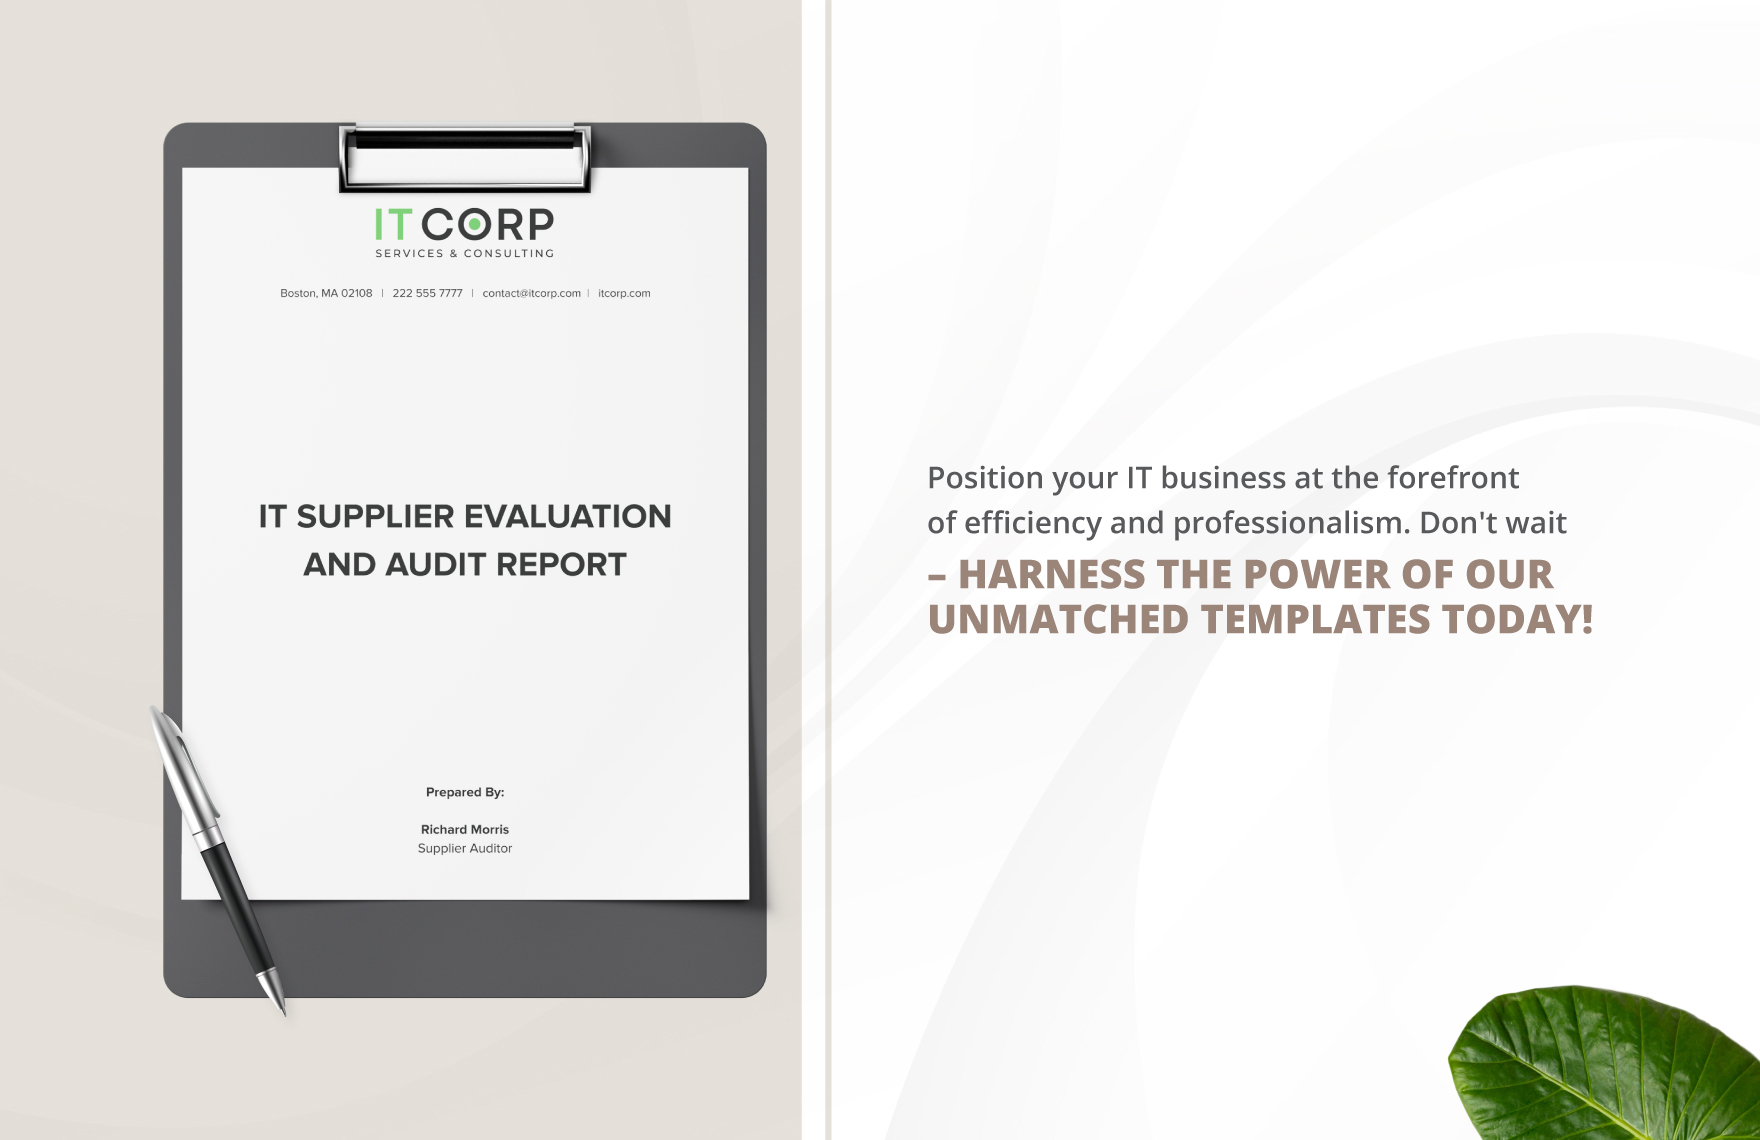 IT Supplier Evaluation and Audit Report Template